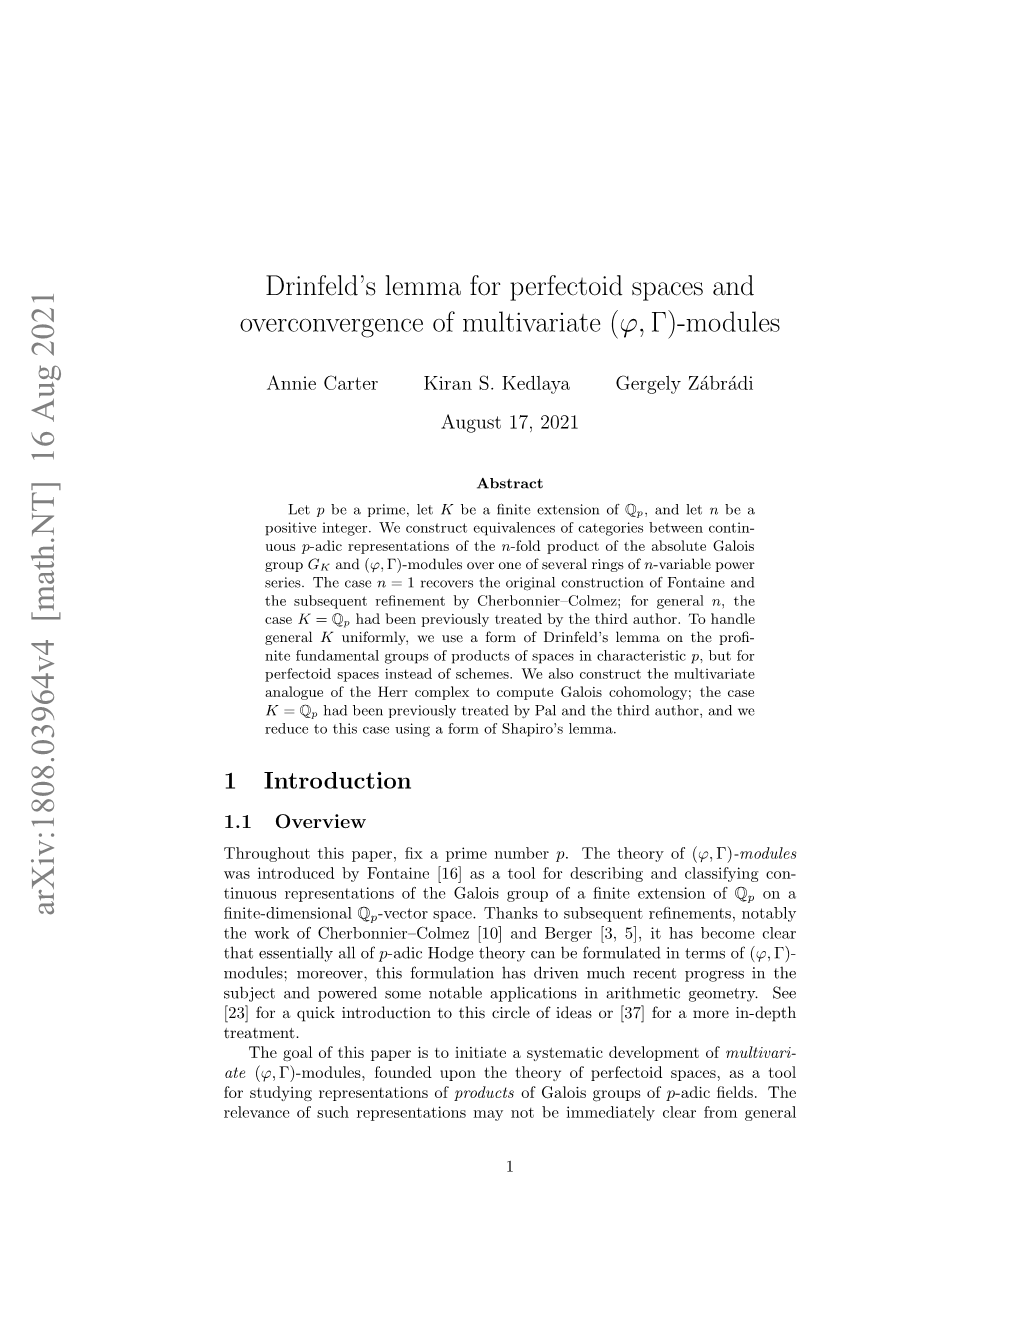 Drinfeld's Lemma for Perfectoid Spaces and Overconvergence of Multivariate